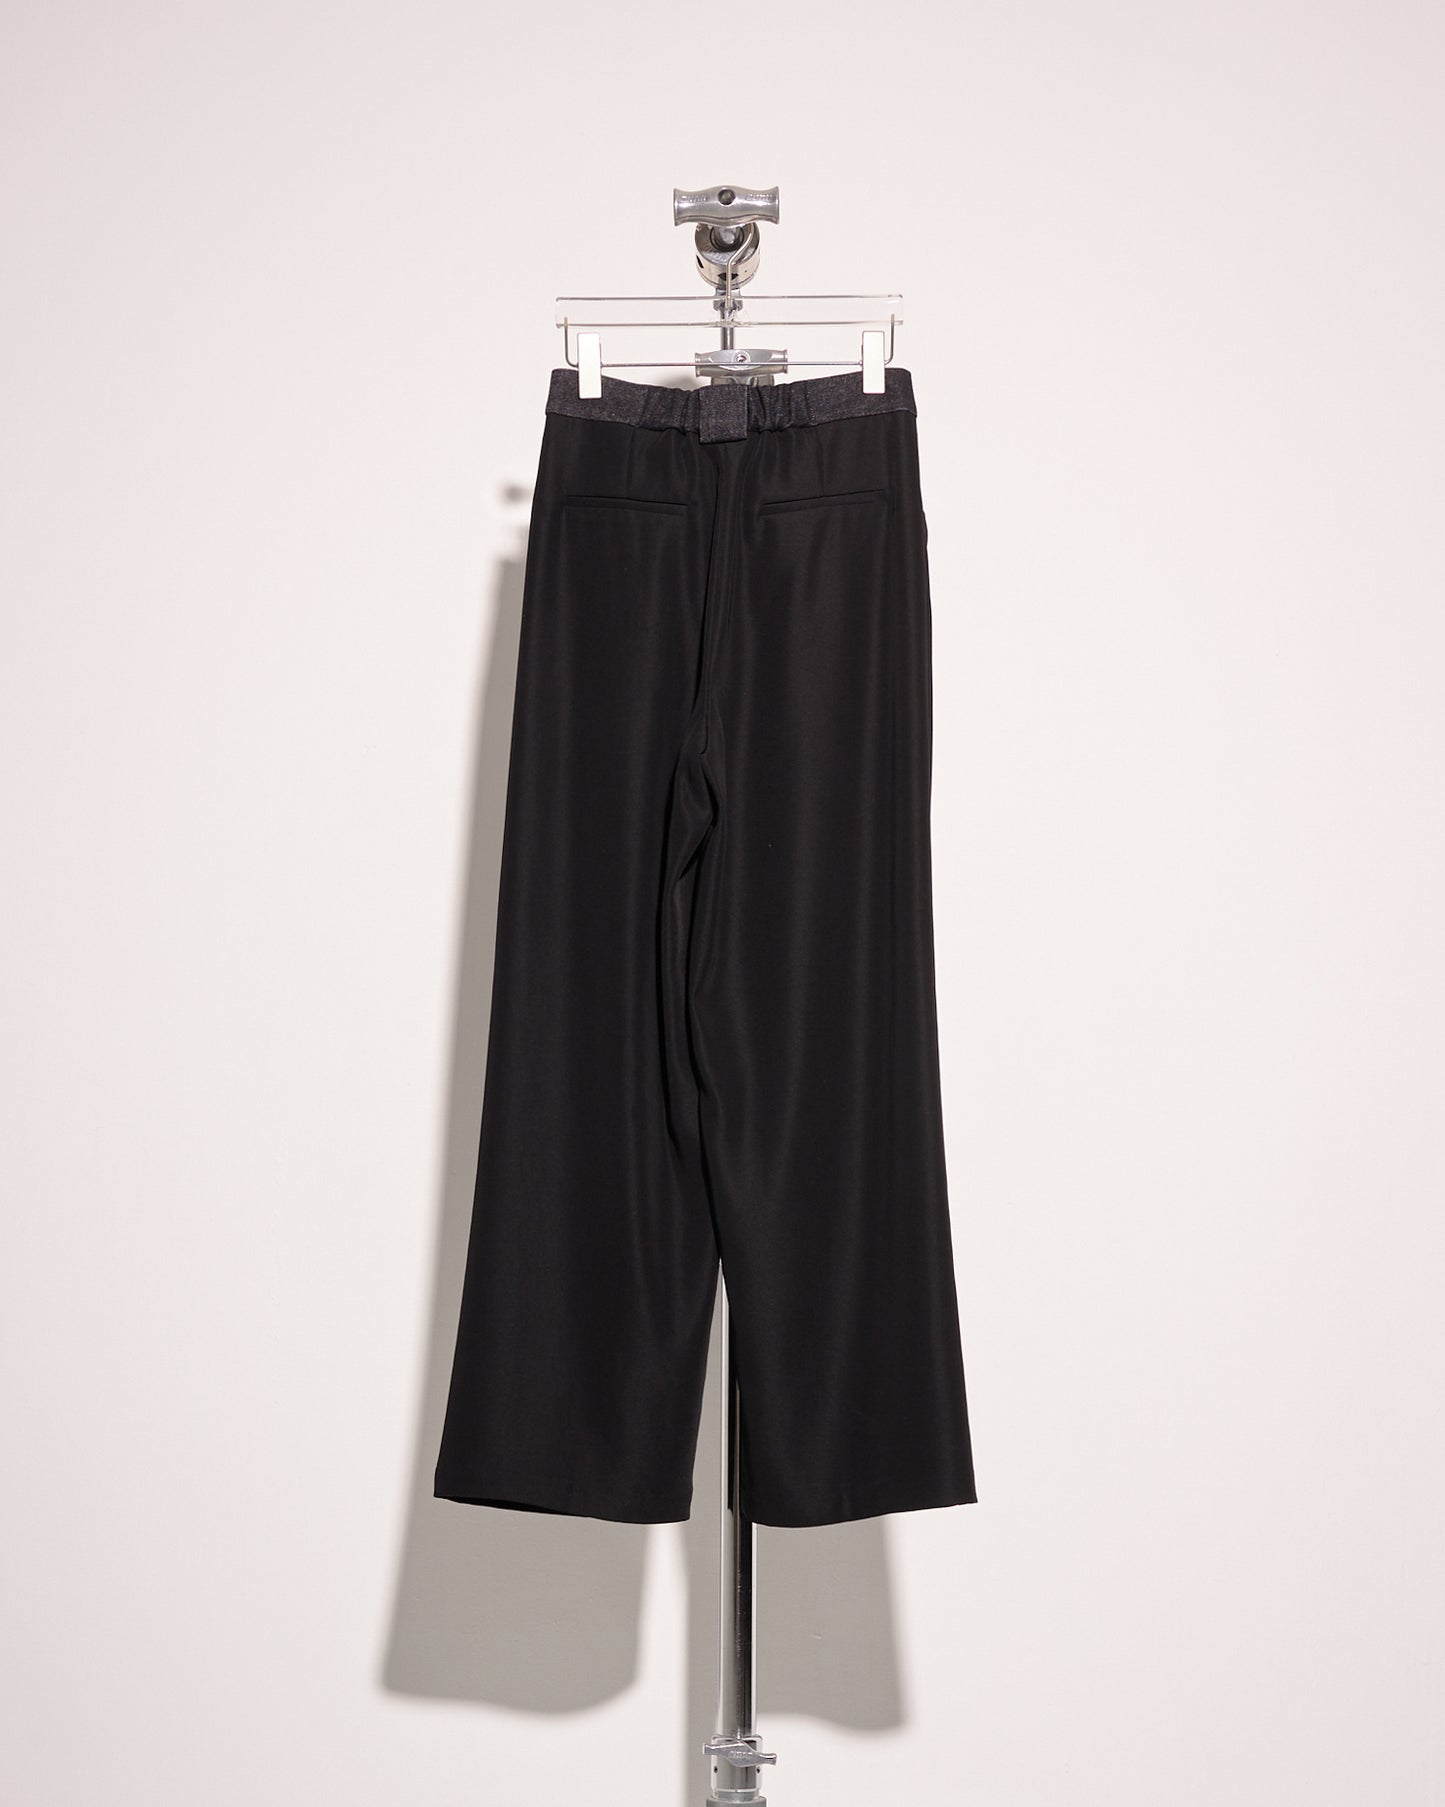 Load image into Gallery viewer, aalis DAMIAN denim waist suiting wide leg pants (Black)
